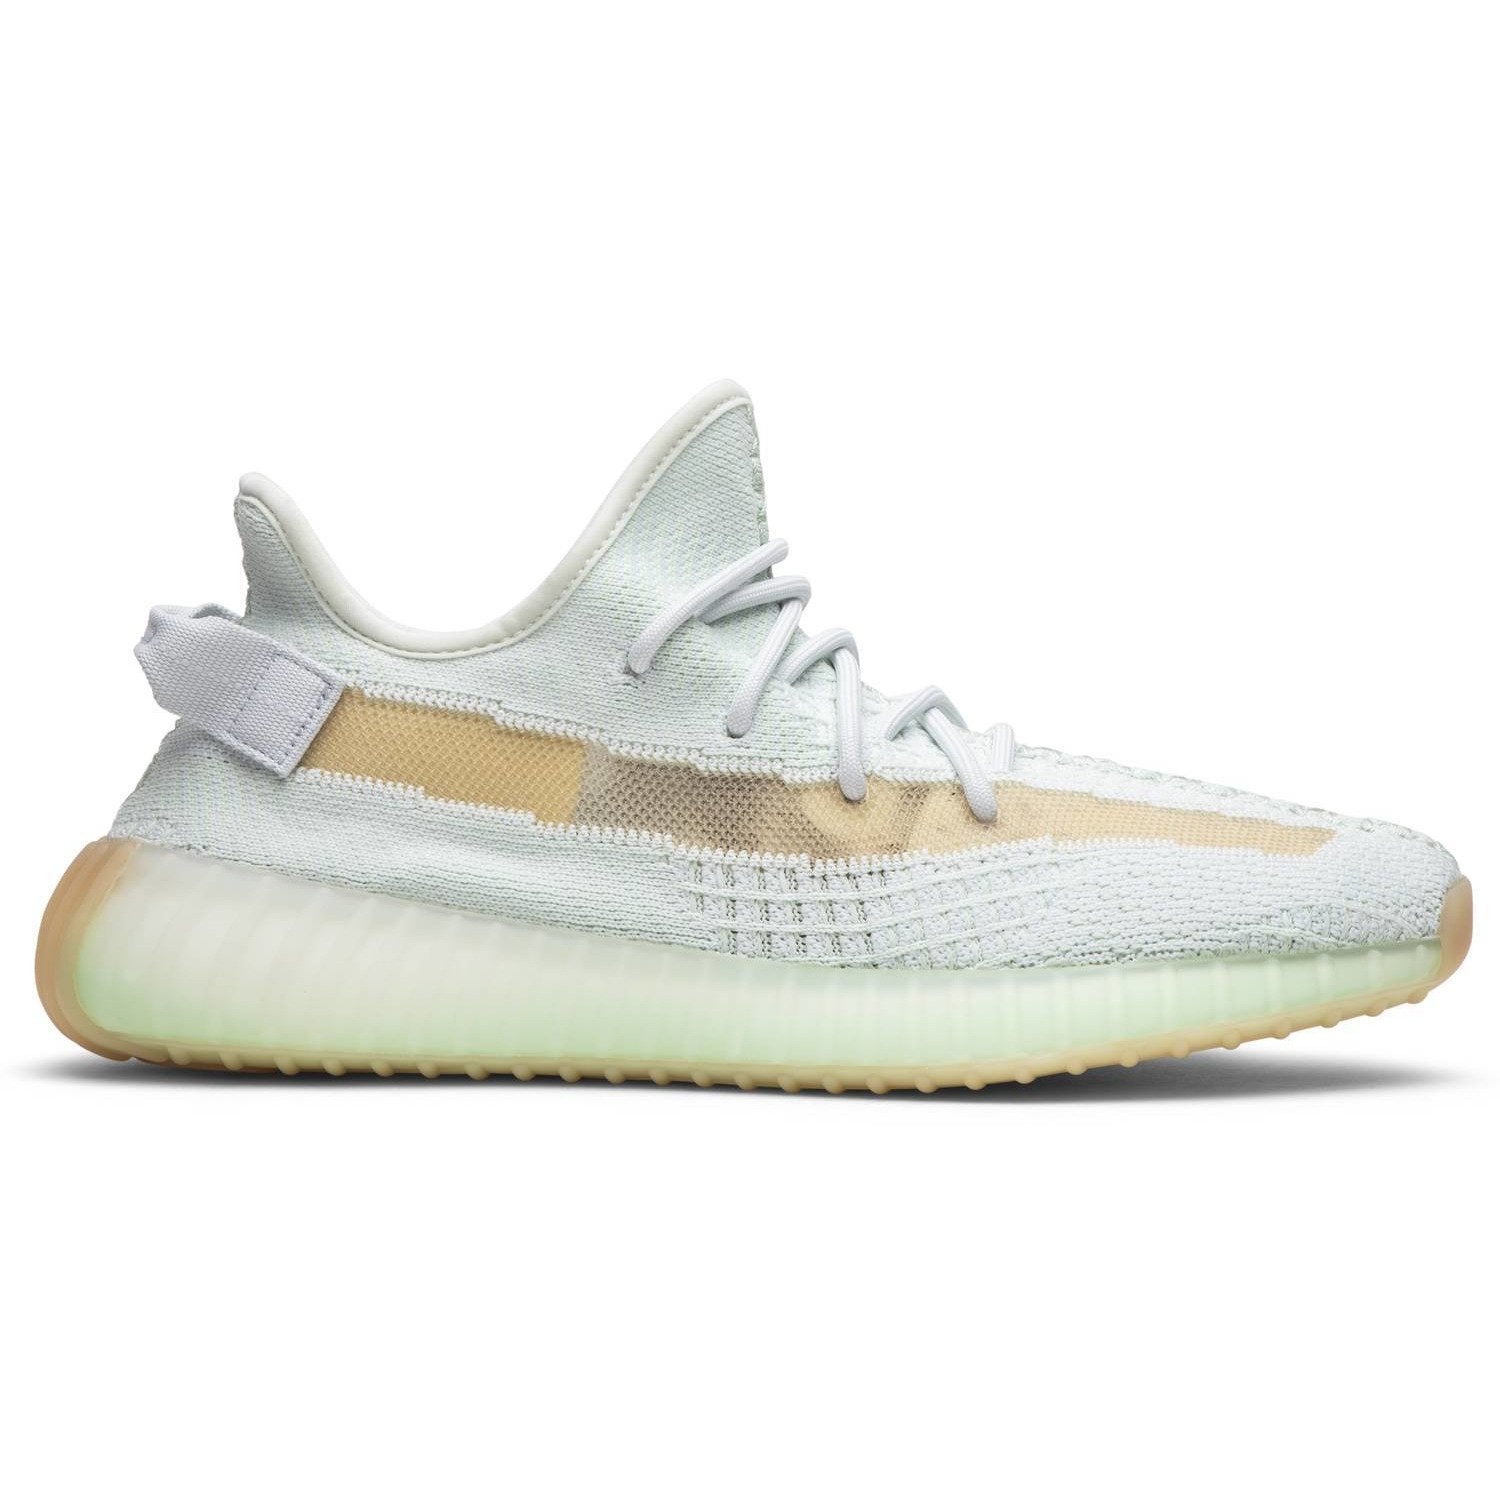 adidas Yeezy Boost 350 V2 'Hyperspace 